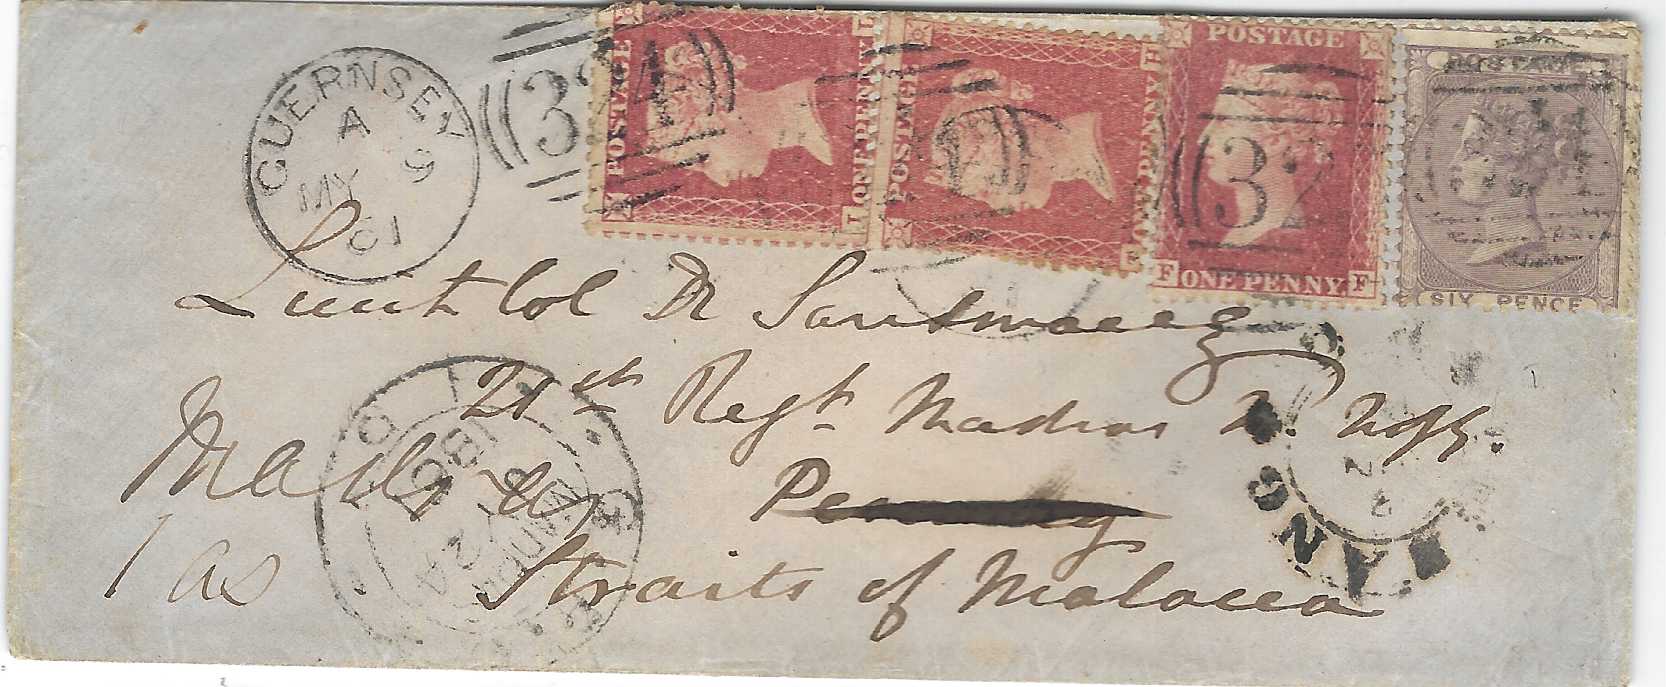 Great Britain : (Guernsey) 1861 (MY 9) envelope to a Lieutenant in 21st Regt, Penang, Straits of Malacca, bearing mixed franking 1854-57 1d. line engraved (3) and 1855-57 6d tied ‘324’ duplex, arrival cds and forwarded to Madras, India with a manuscript “1 as” charge and arrival cds.